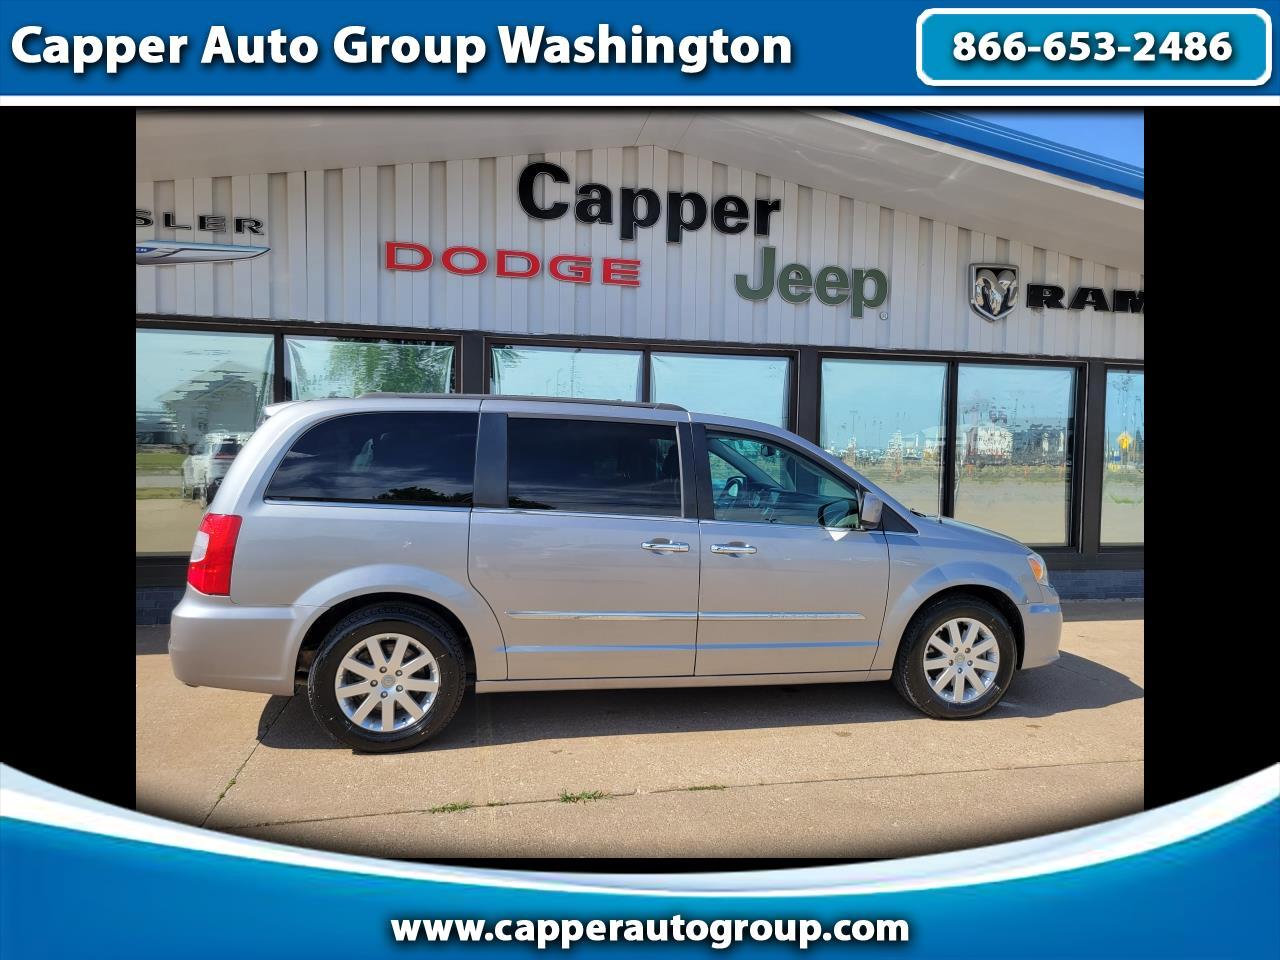 2016 Chrysler Town & Country 4dr Wgn Touring